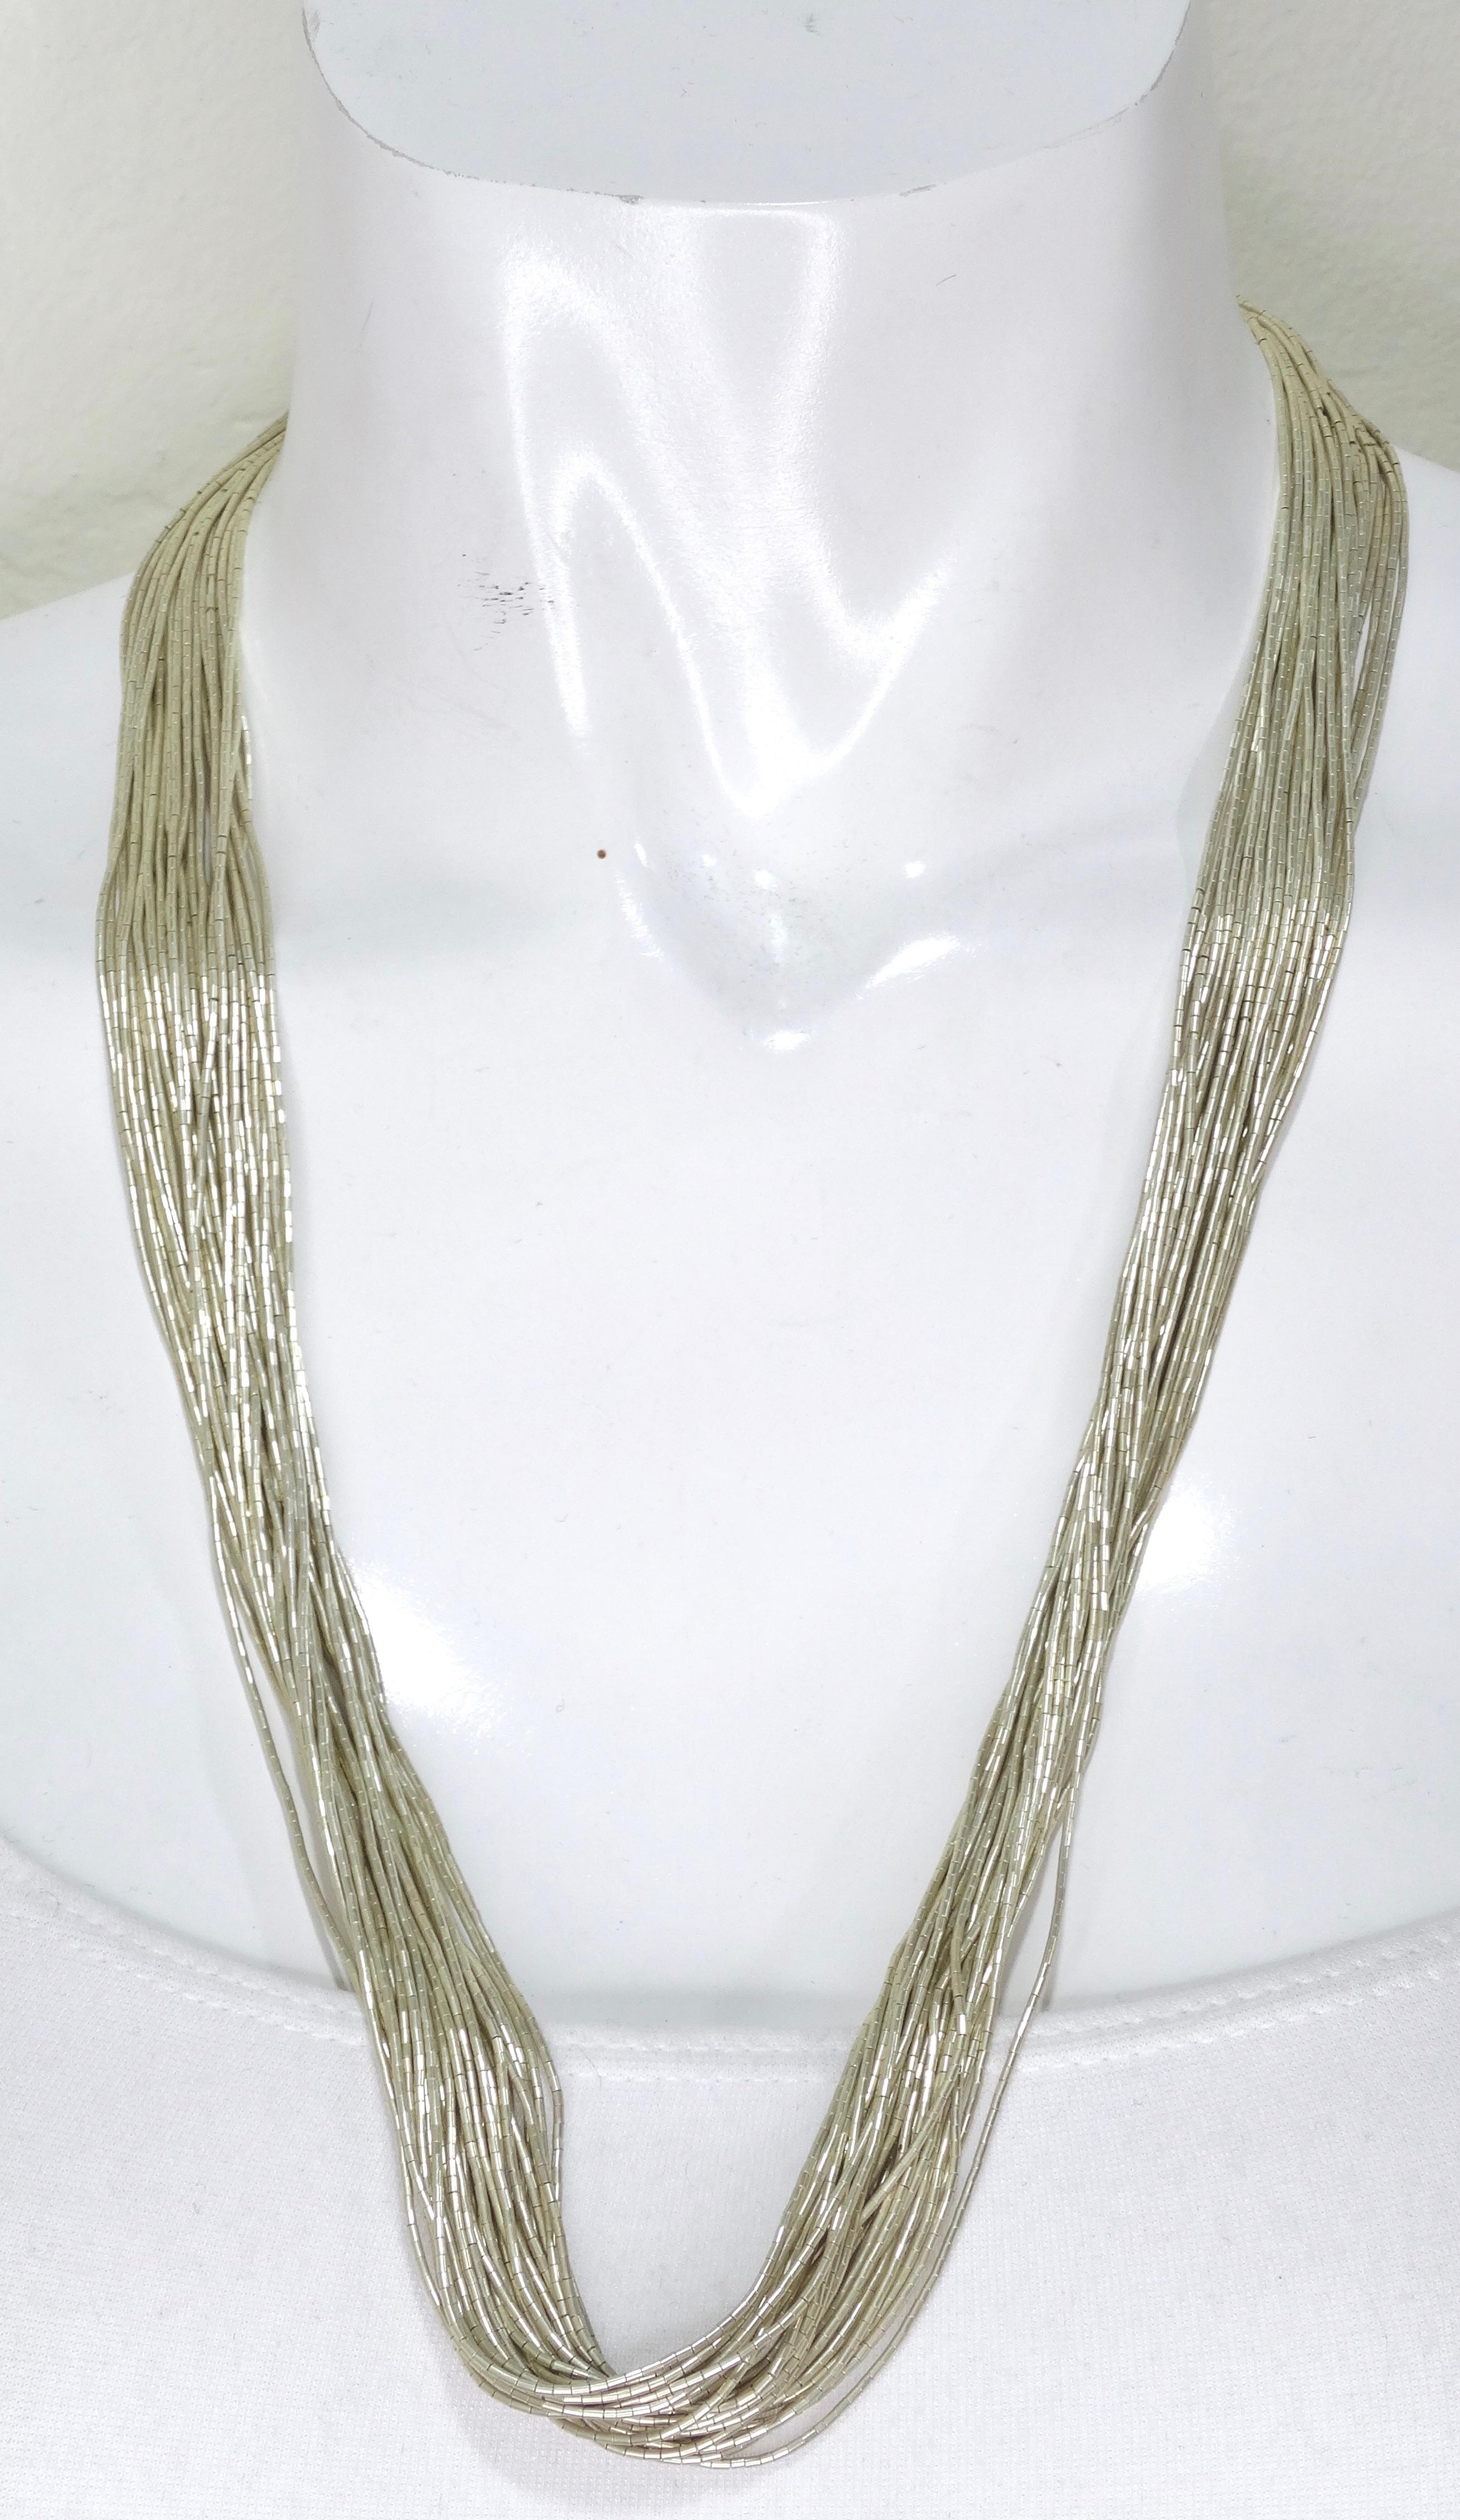 Here is another treasure to add to your jewelry trunk! An extremely unique Navajo vintage liquid silver necklace with a rare count of 30 strands. The 30 strands are made of hundreds of beads strung together to create a cascading liquid look that is